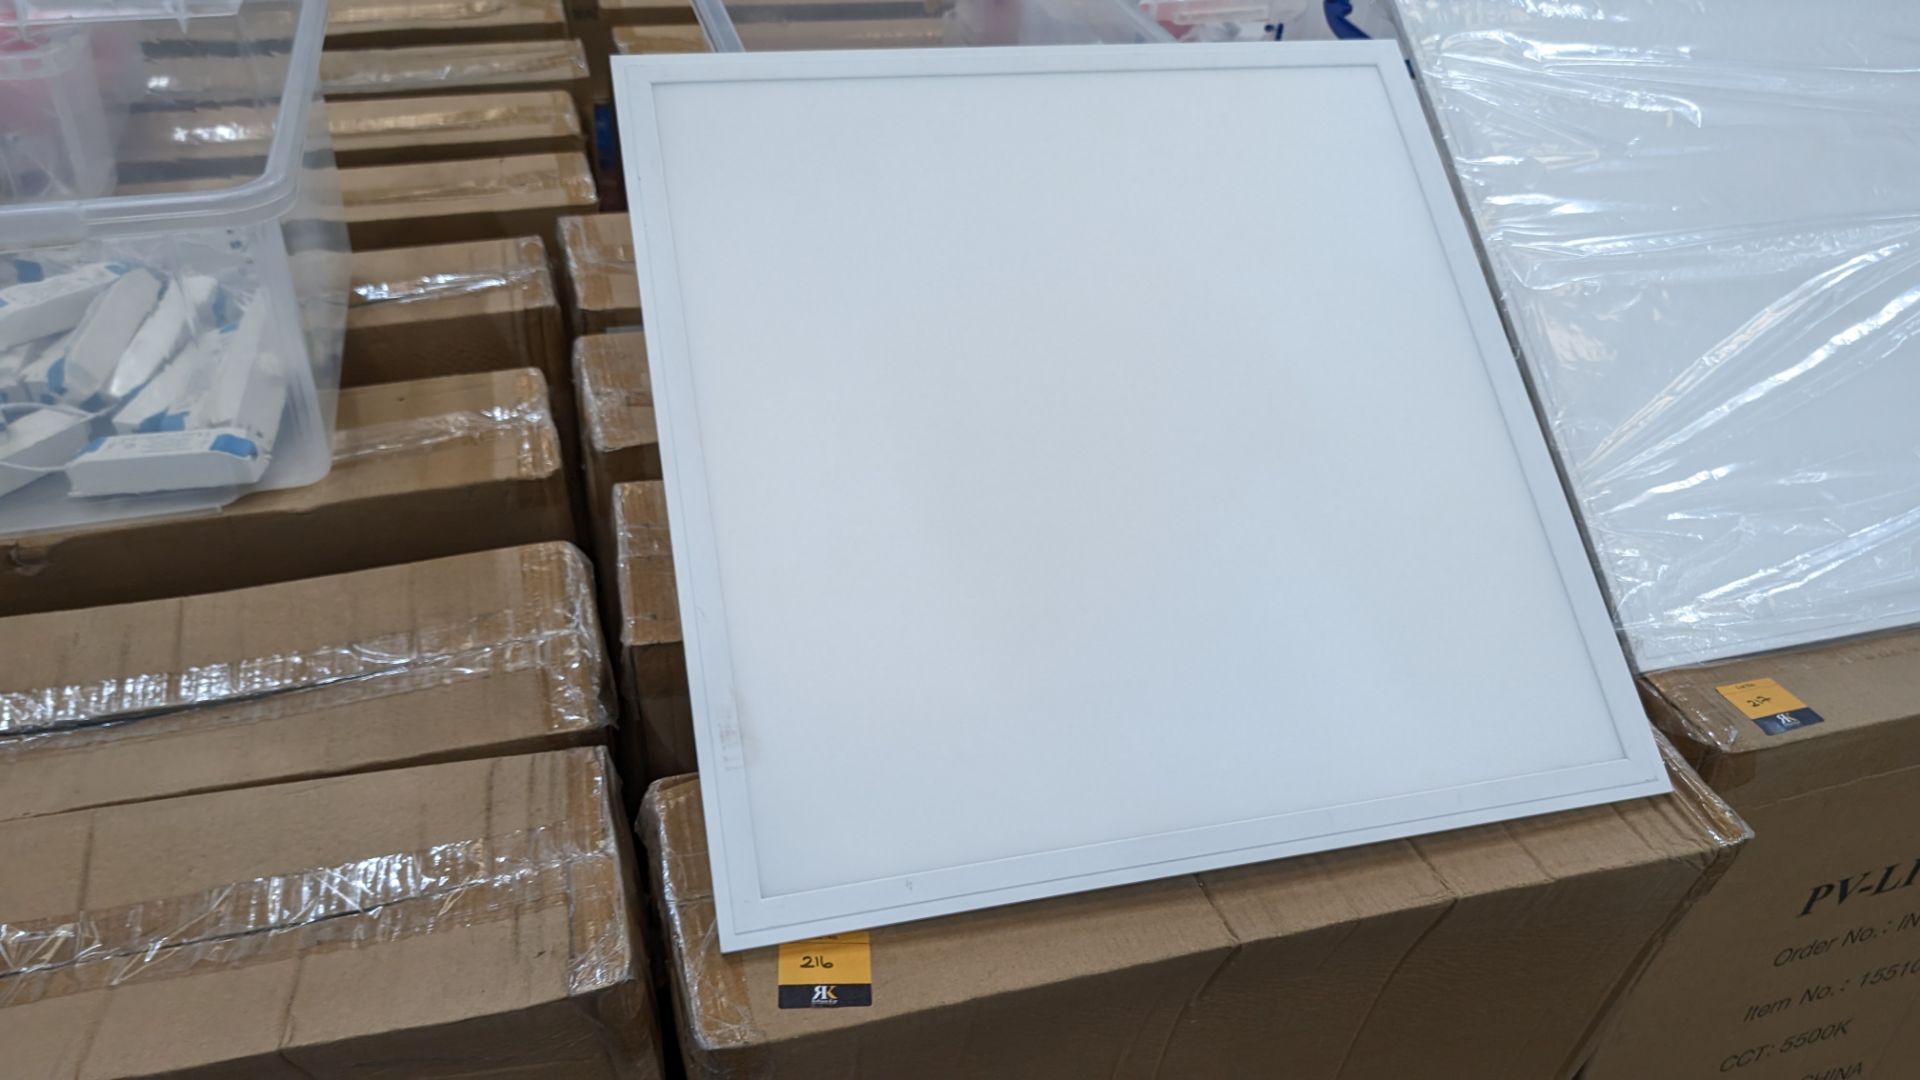 16 off 600mm x 600mm 36w 6000k 4320 lumens cold white LED lighting panels. 36w drivers. This lot c - Image 5 of 12